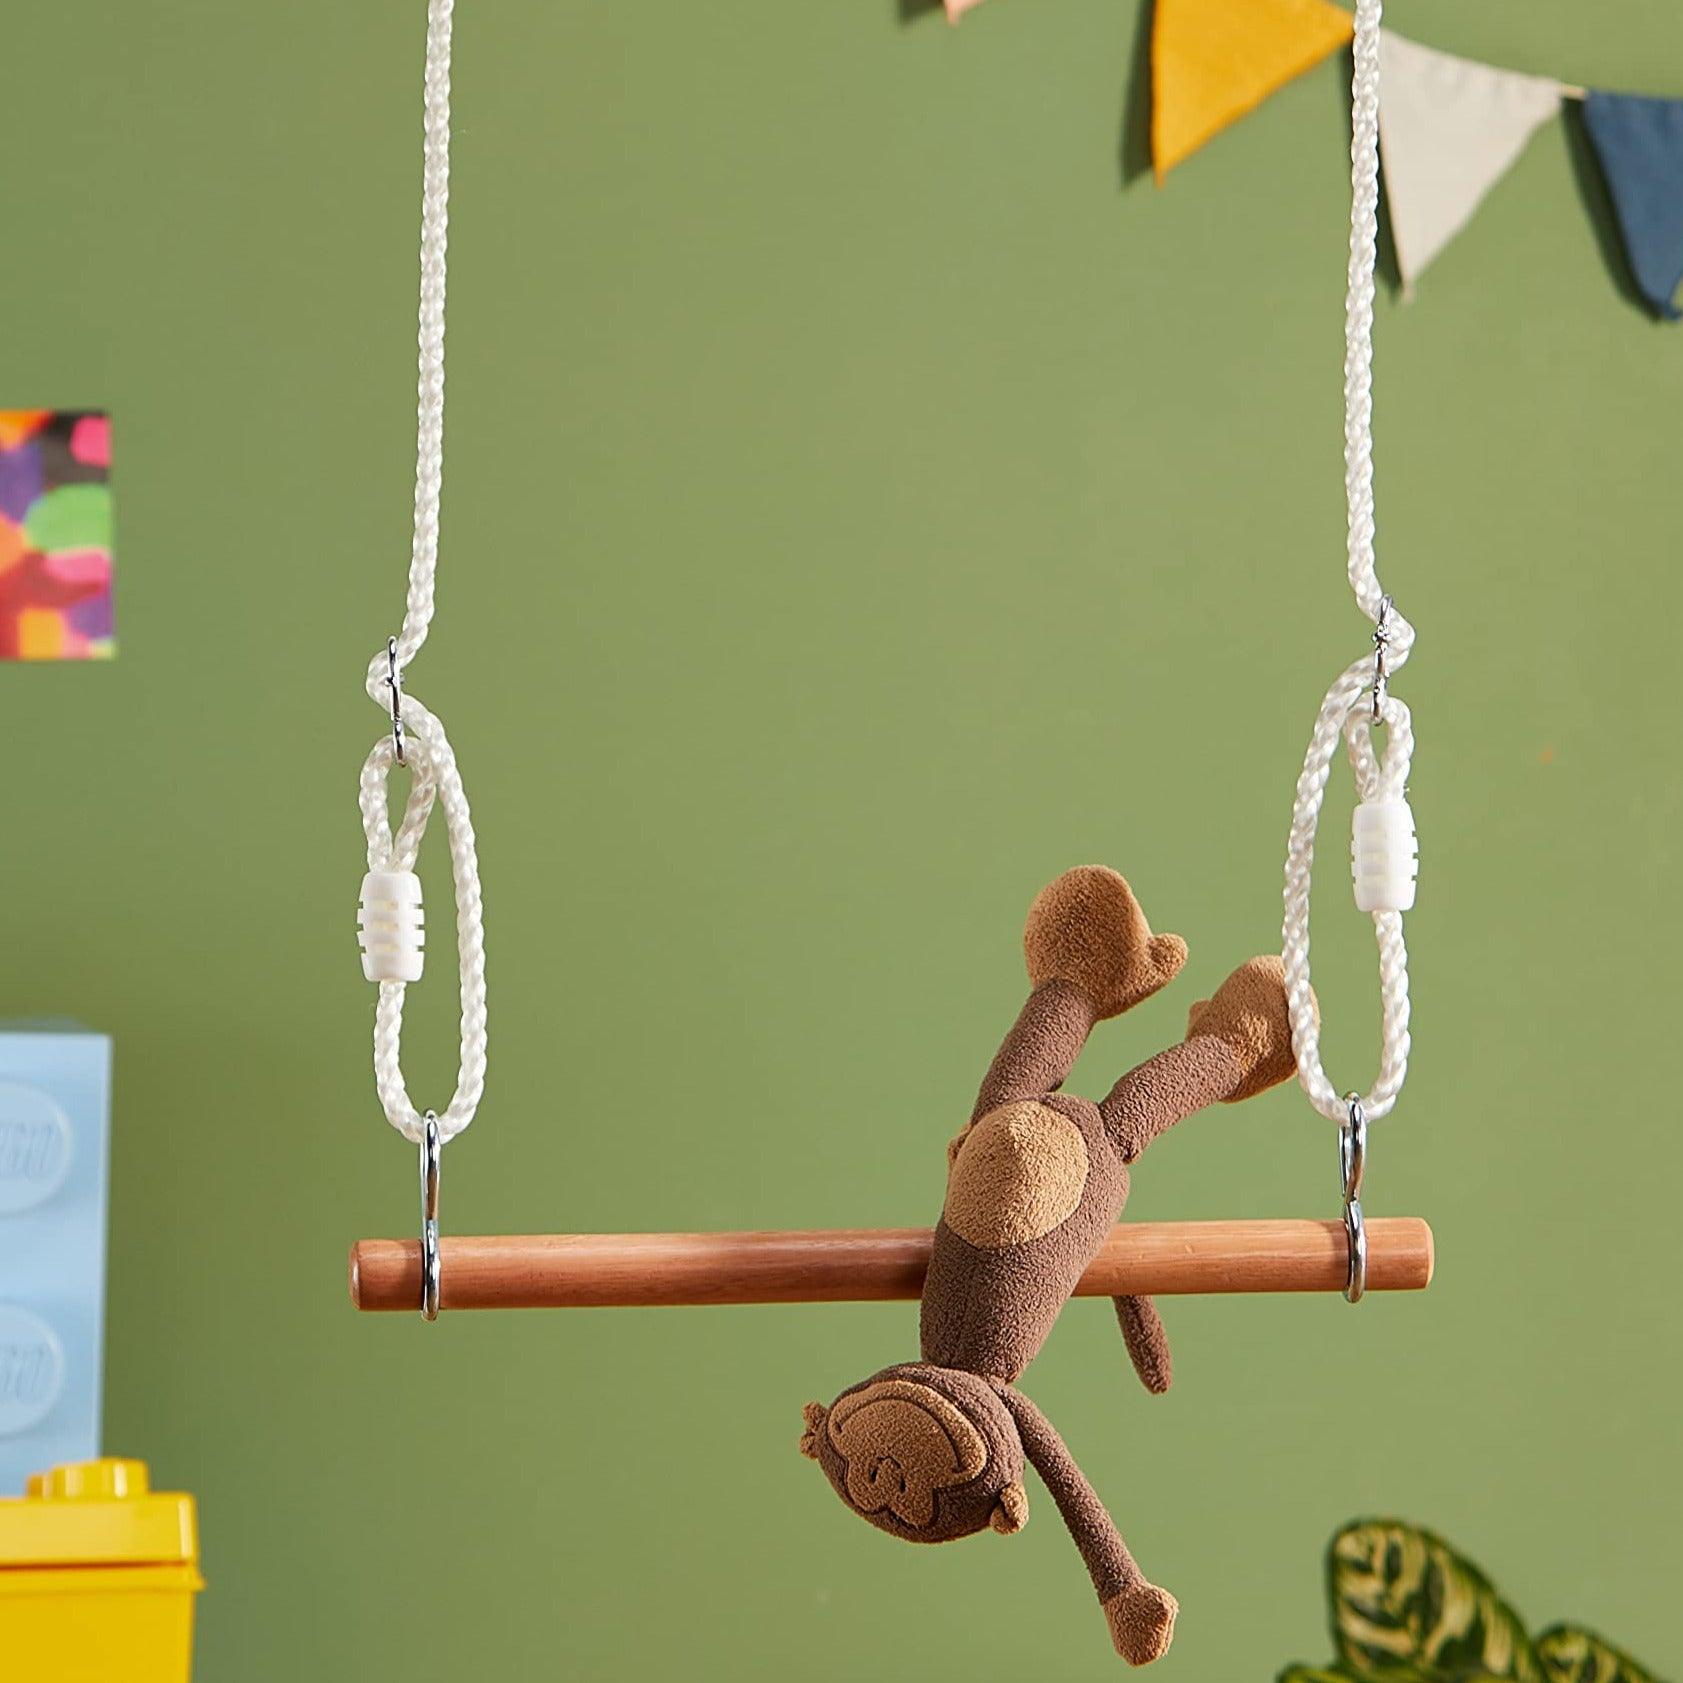 Small Foot: Wooden Trapeze swing on a wooden bar